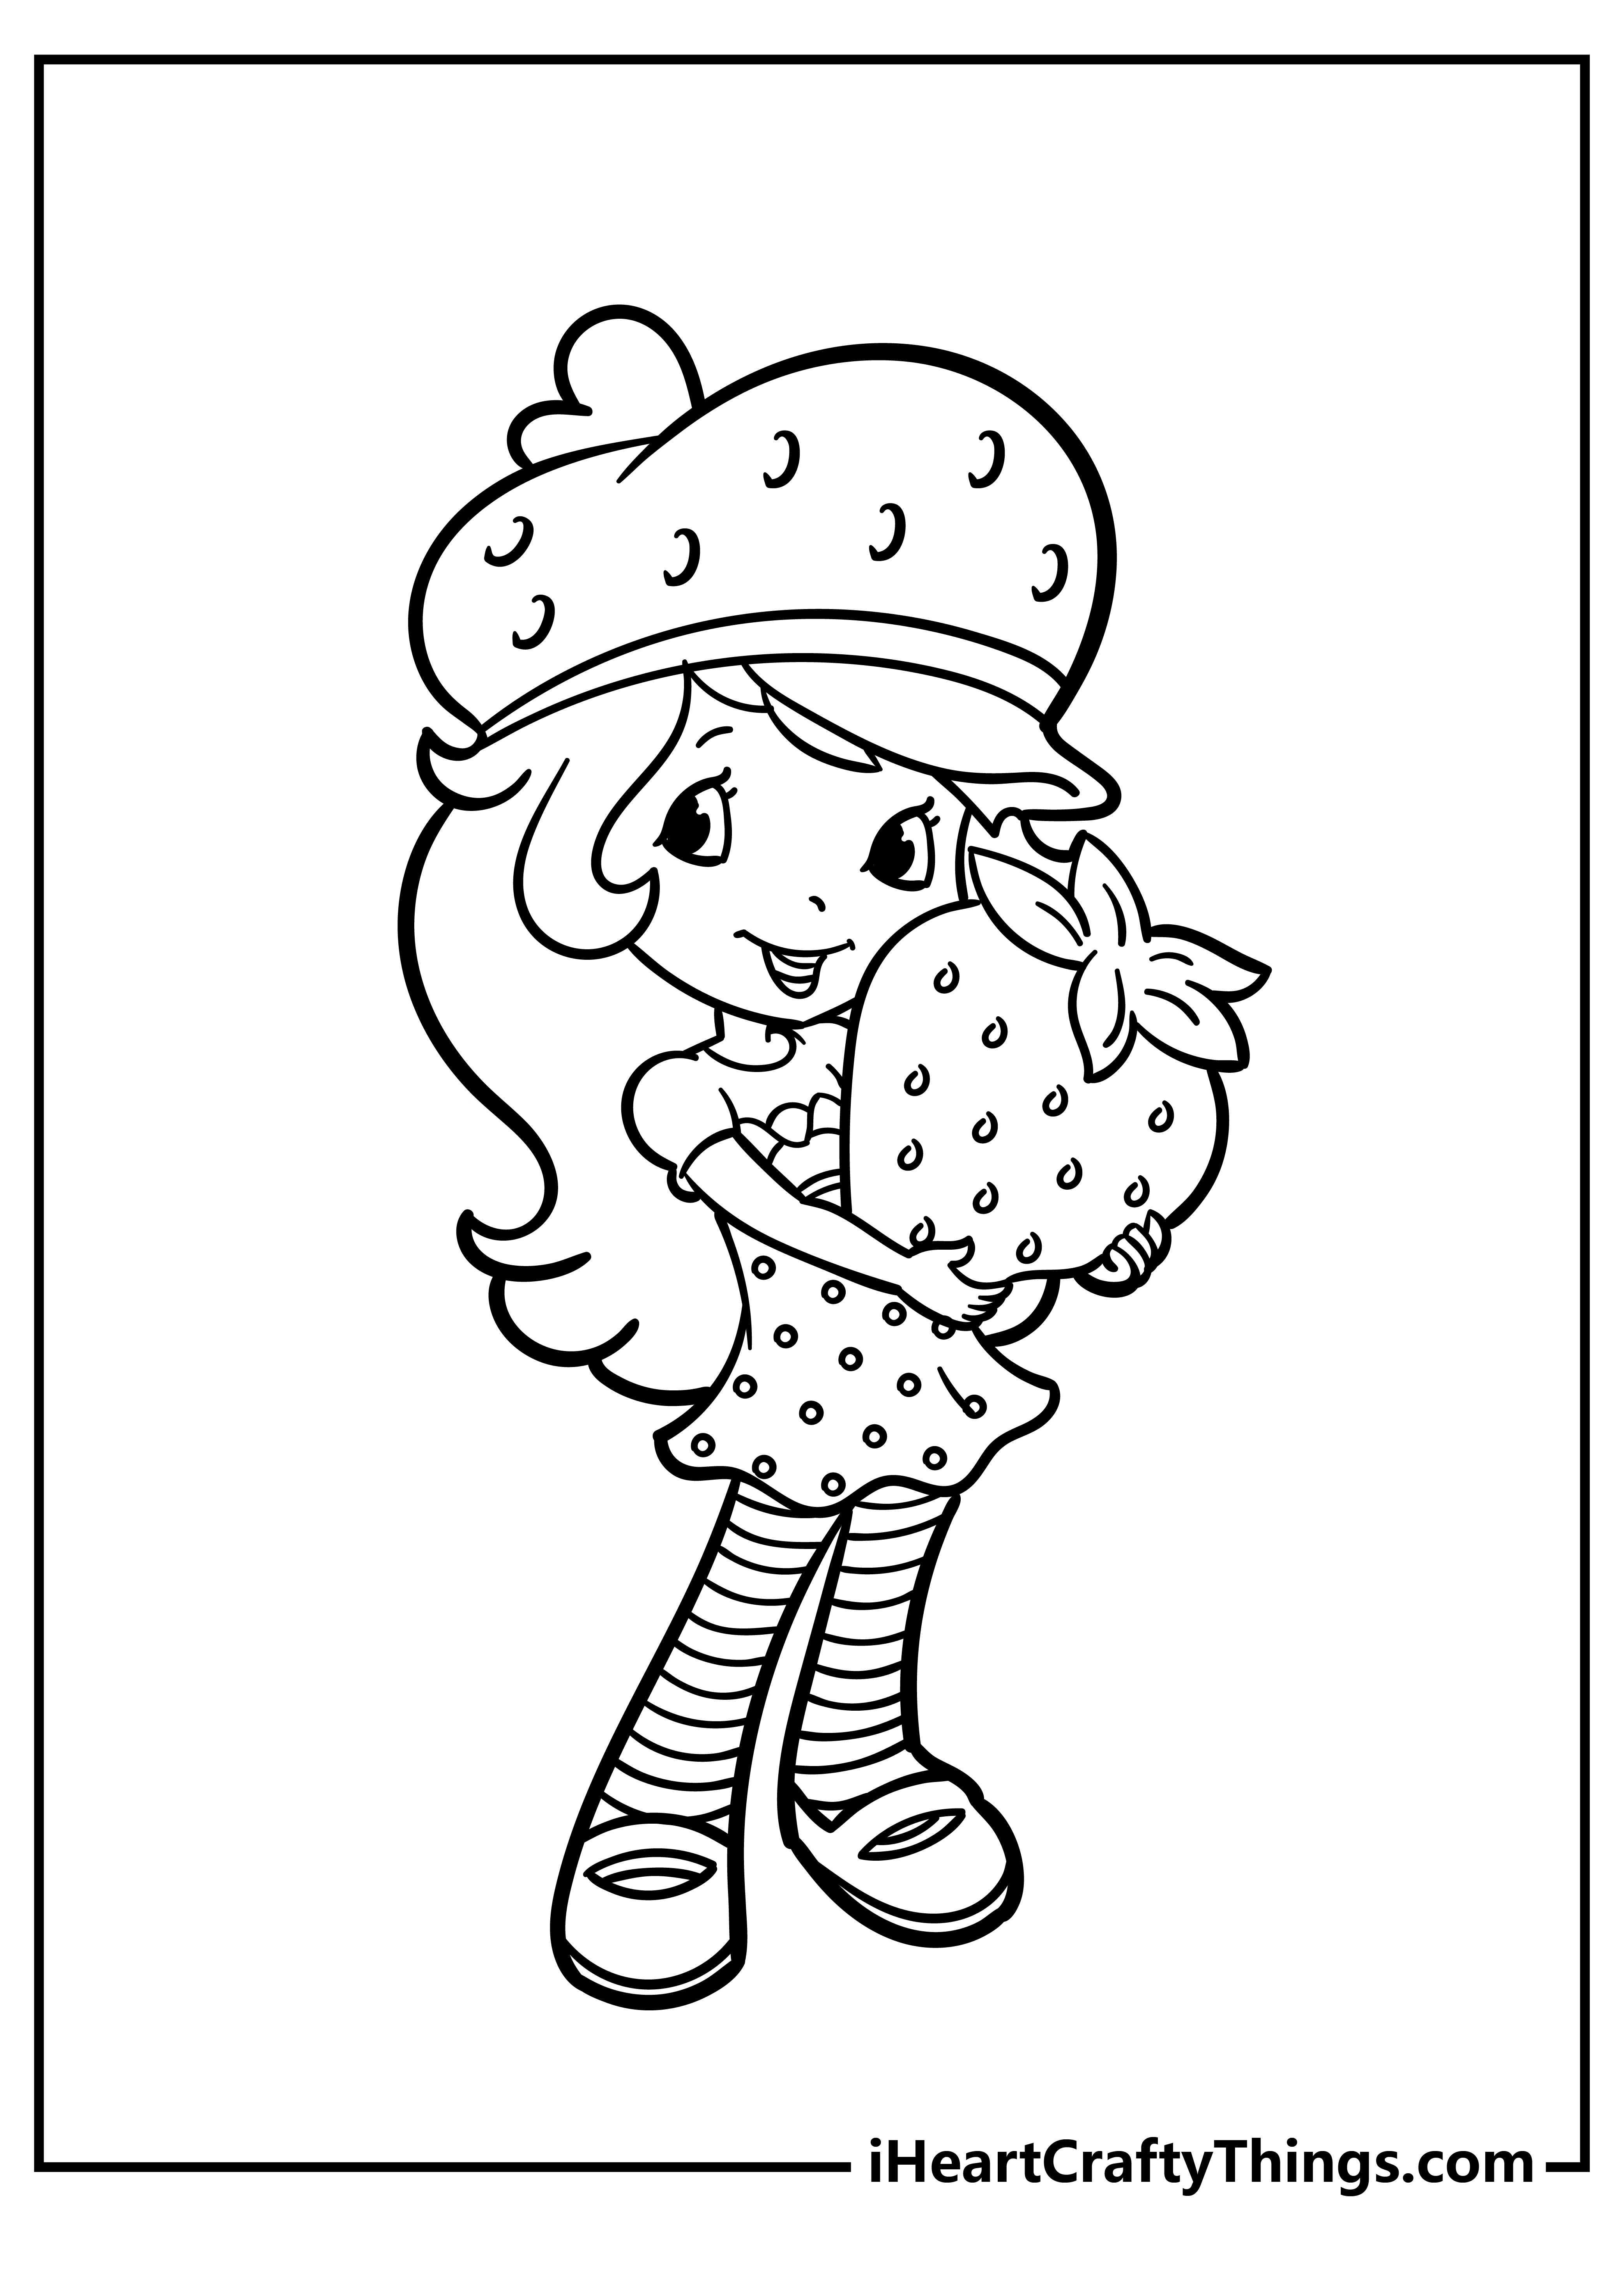 Strawberry Shortcake Coloring Pages for kids free download